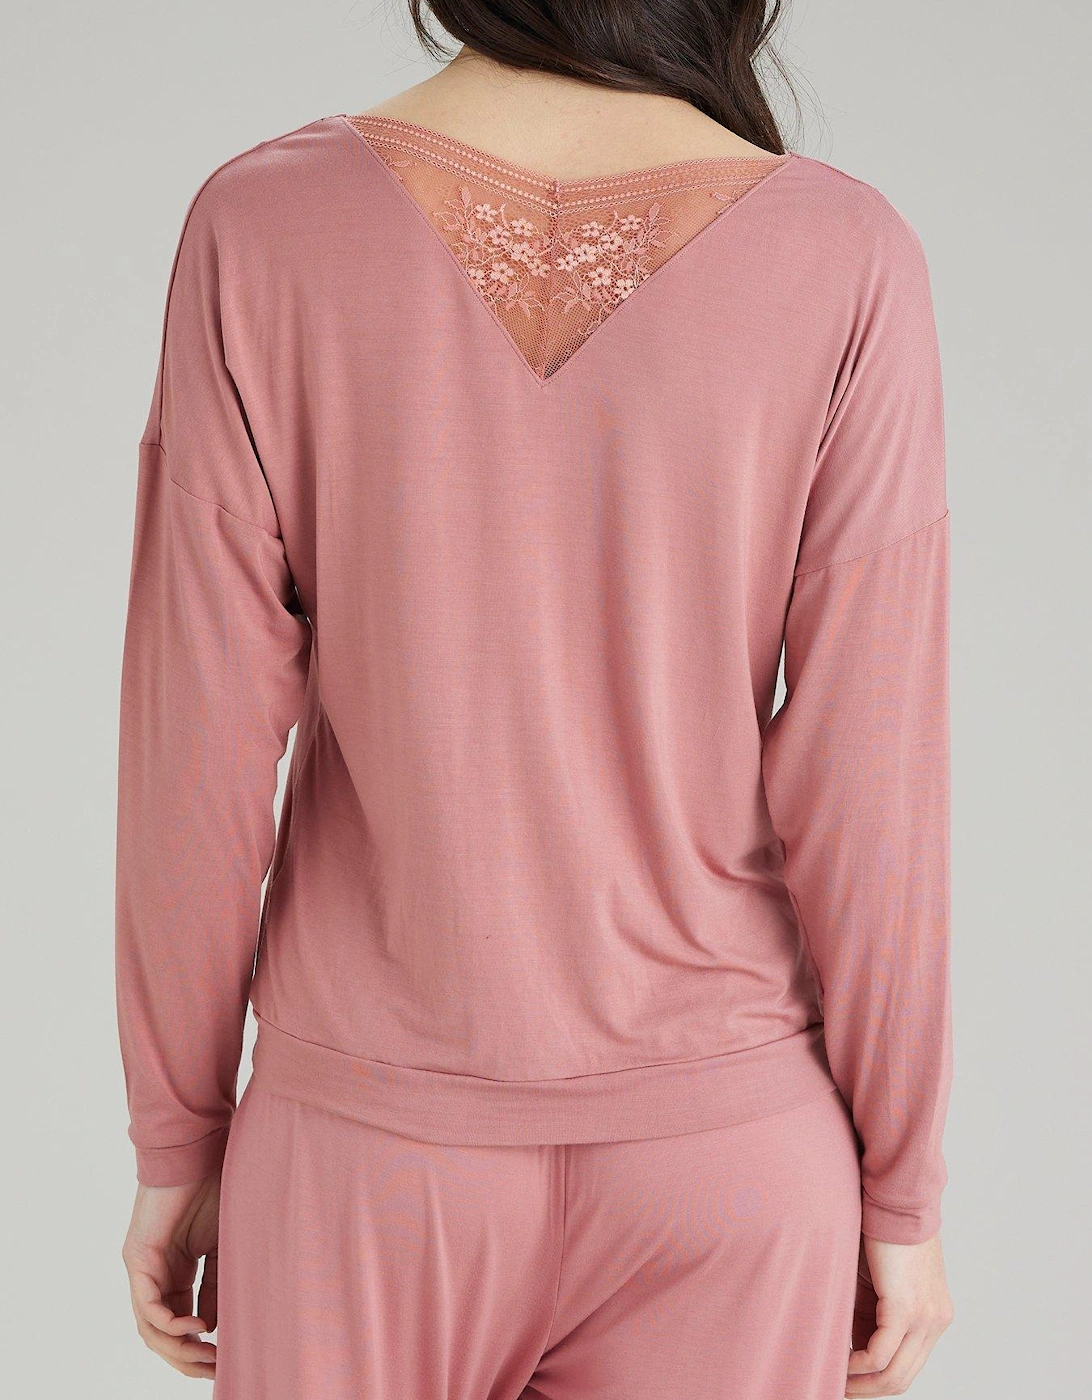 Botanical Lace Lounge Slouch Top - Dusty Rose